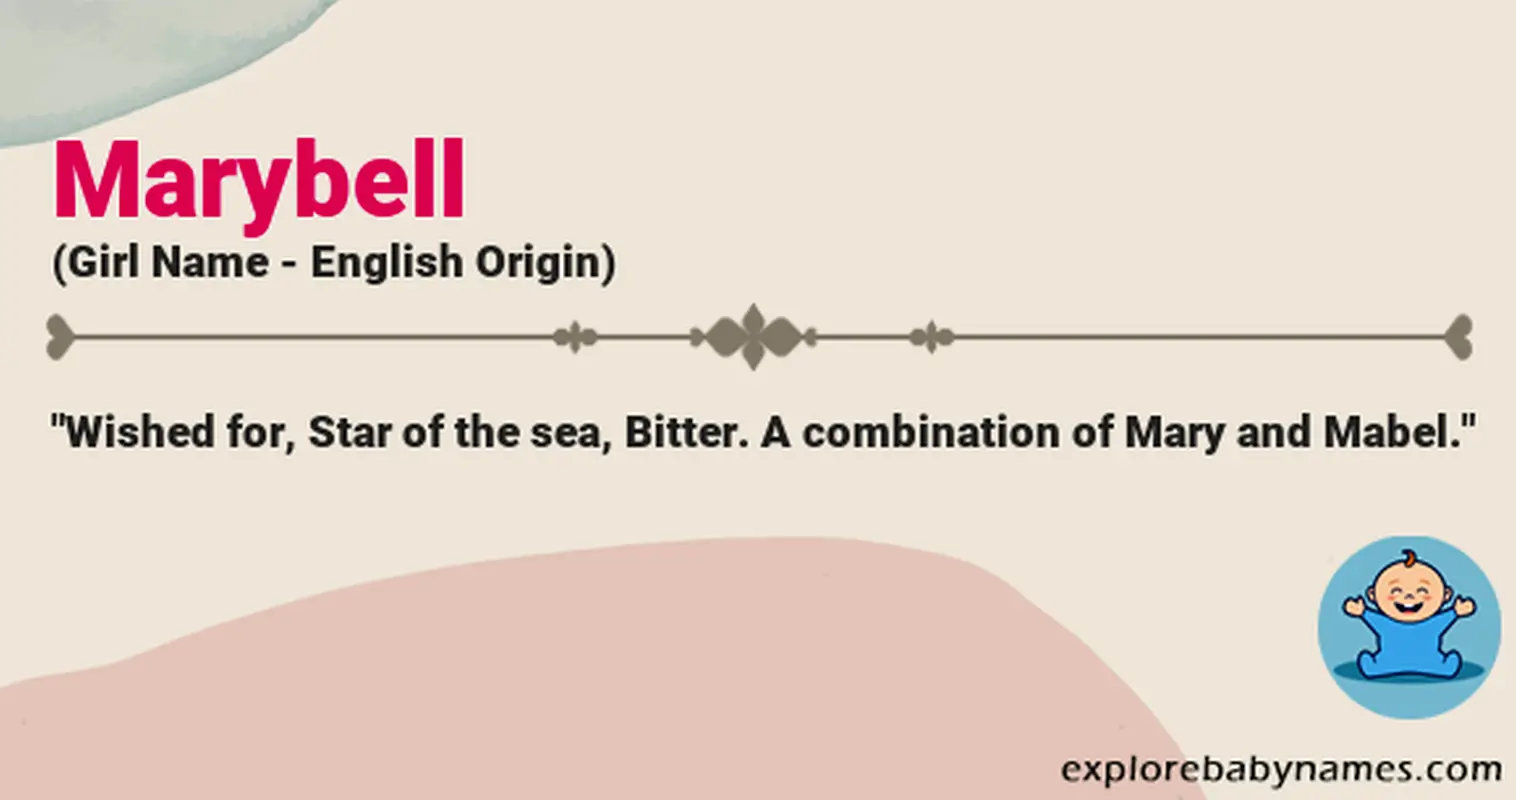 Meaning of Marybell